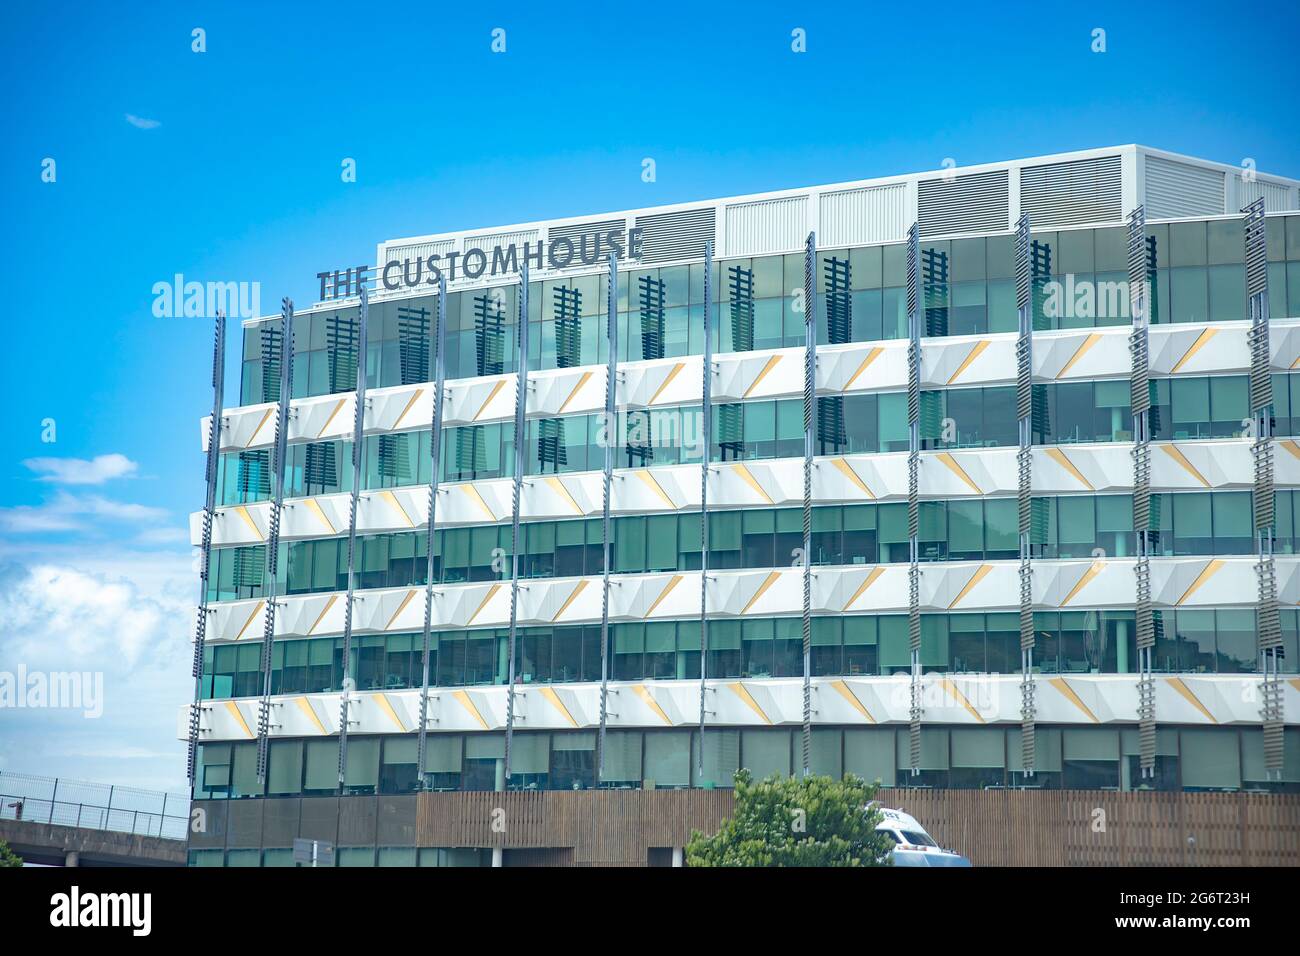 New Zealand Customs Head Office located in Wellington, New Zealand. Taken in Welington, New Zealand on December 4, 2019 Stock Photo